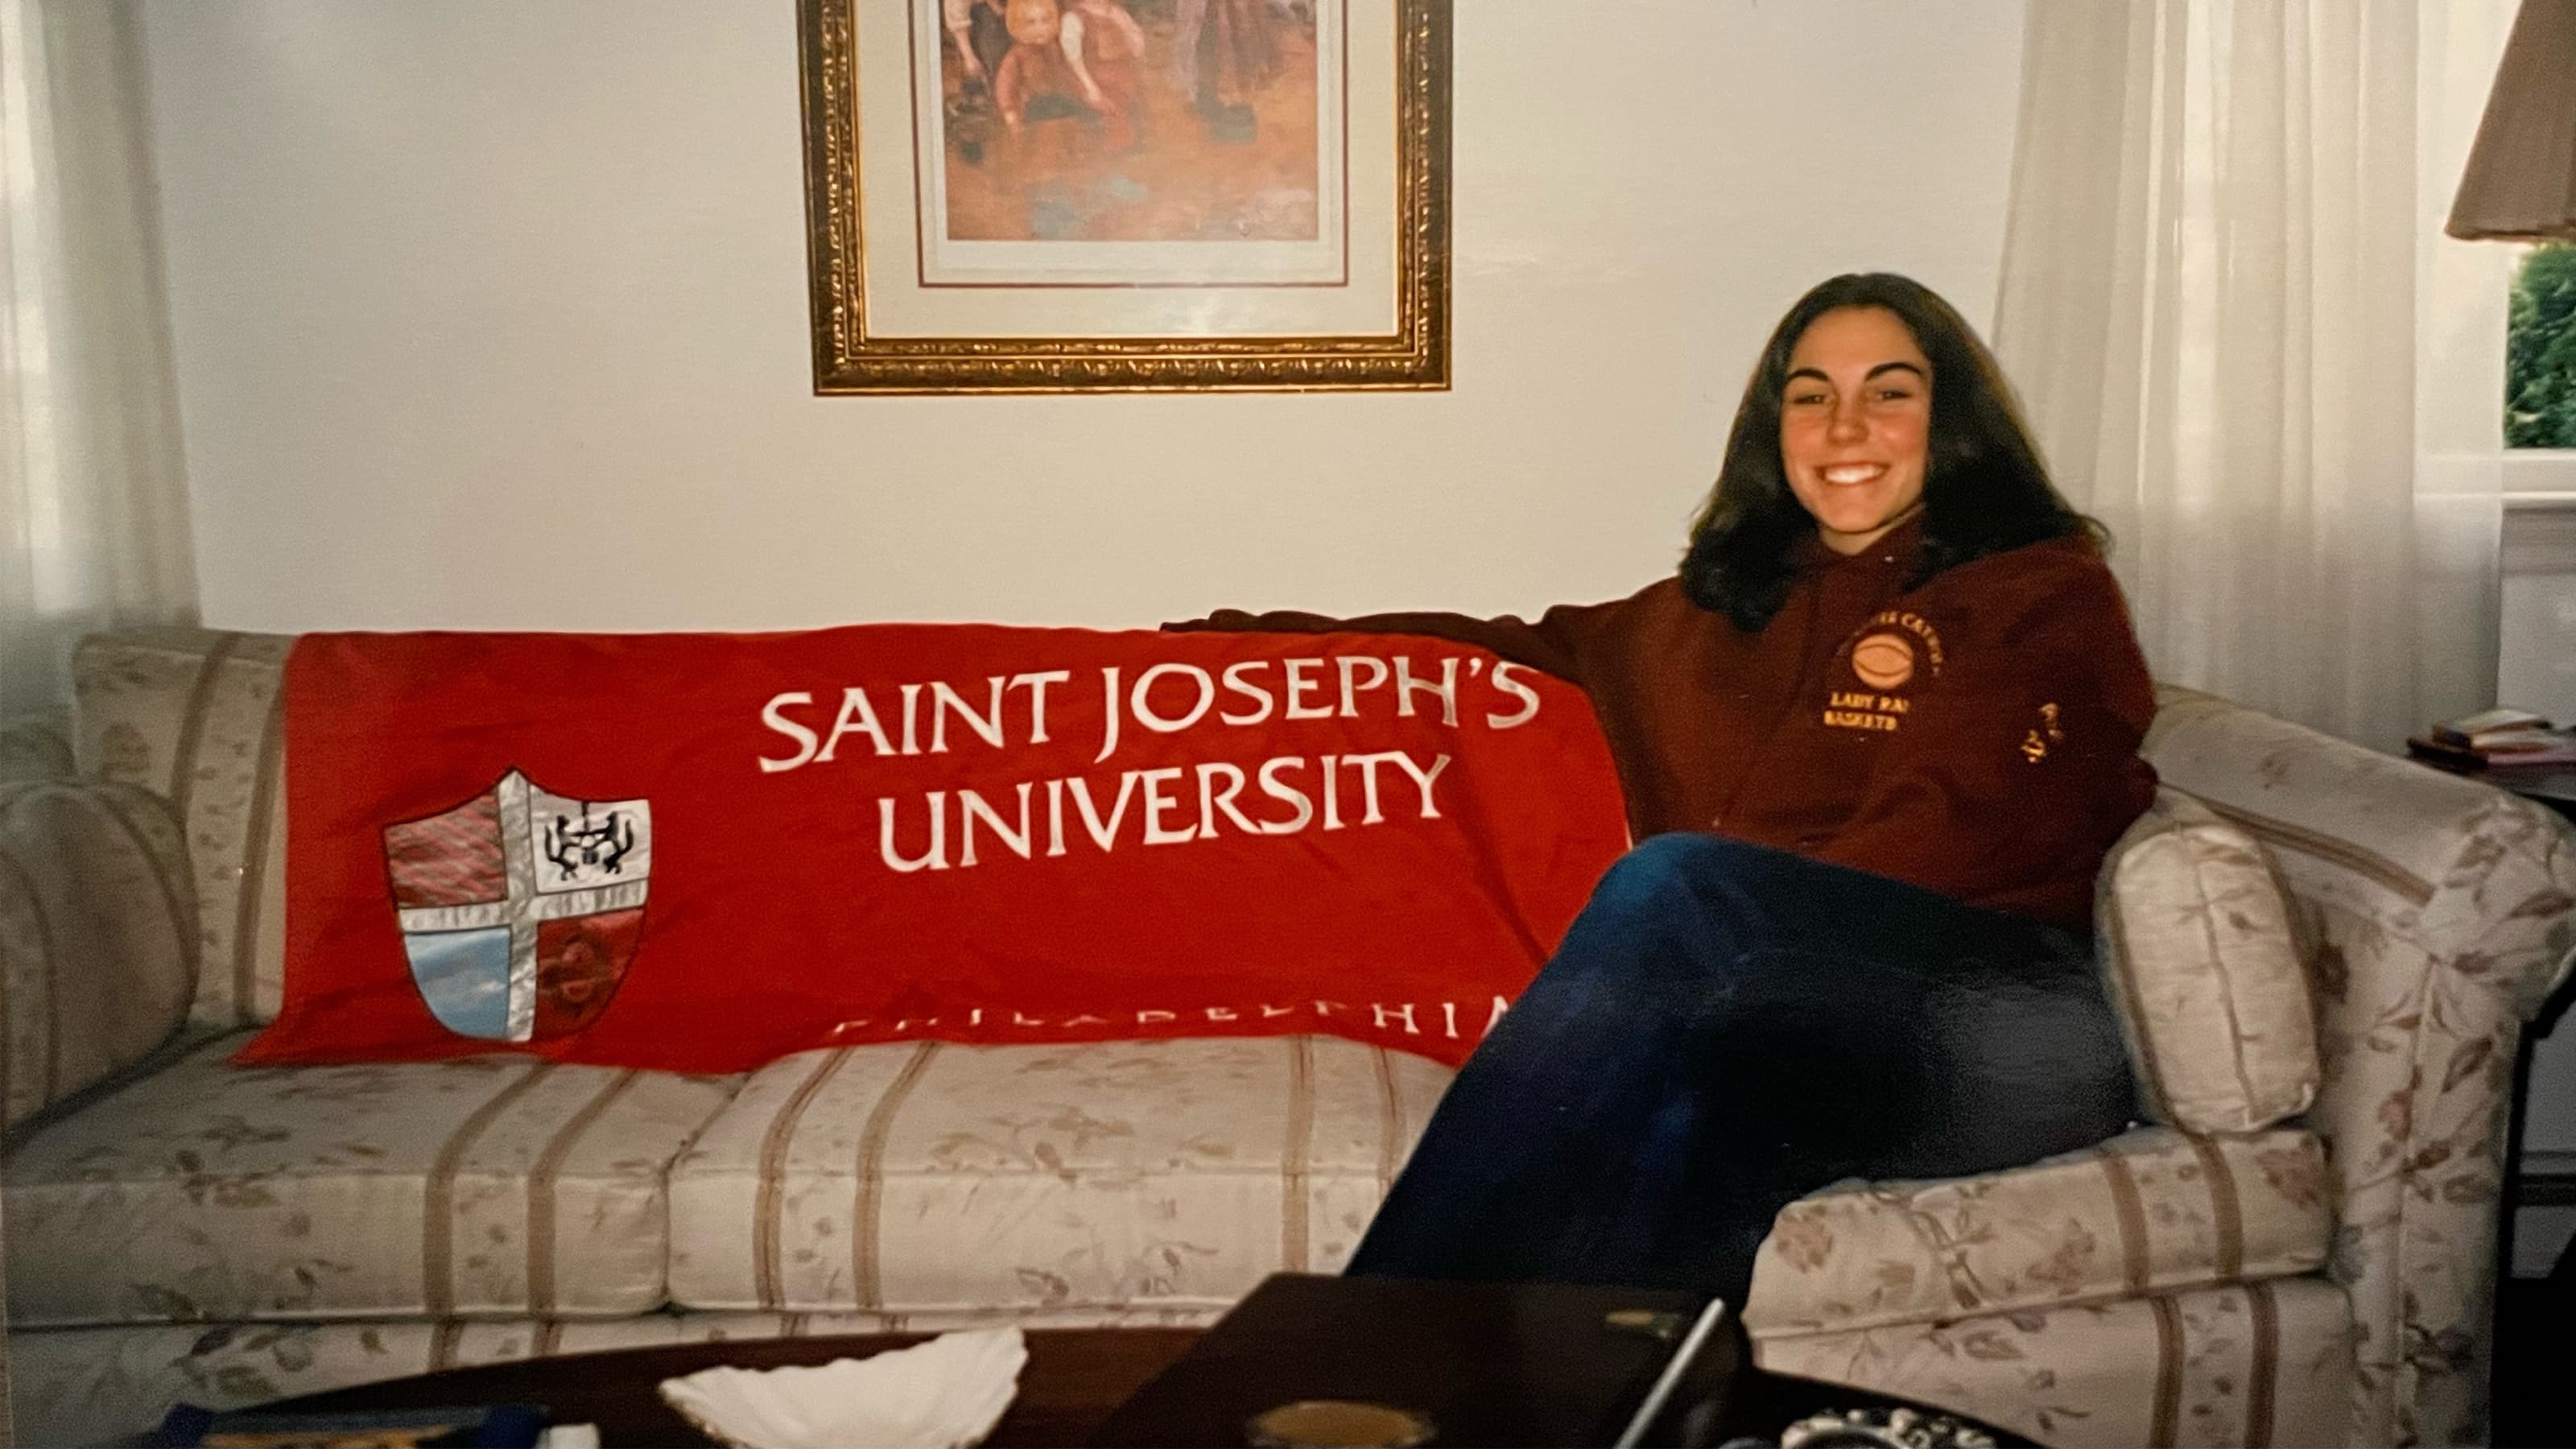 Lisa Traum Alexander ’06 surprised her grandparents, Marilyn and Richard (Dick) Kelly ’59, with the news that she would be attending Saint Joseph’s. She was the first grandchild to go to college.